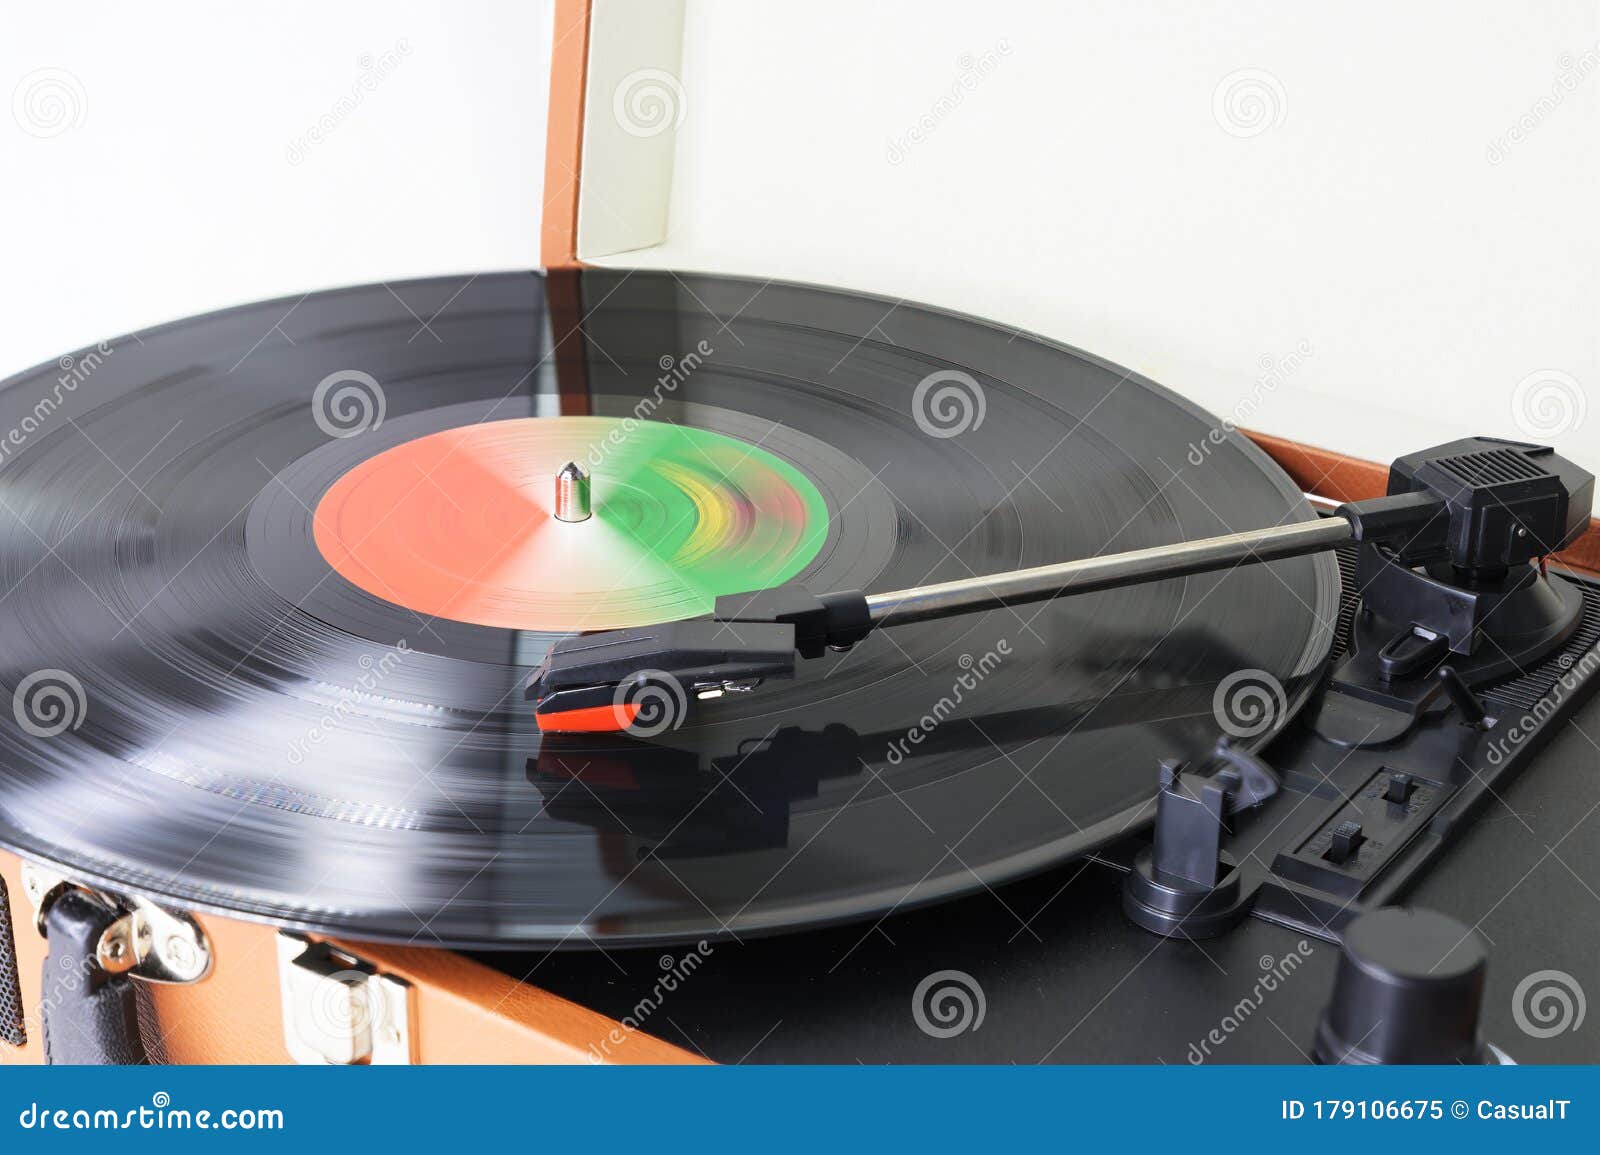 Closeup Of An Old Fashioned Suitcase Record Player And Turntable With A Spinning Vinyl Record Isolated On White Stock Image Image Of Analog Closeup